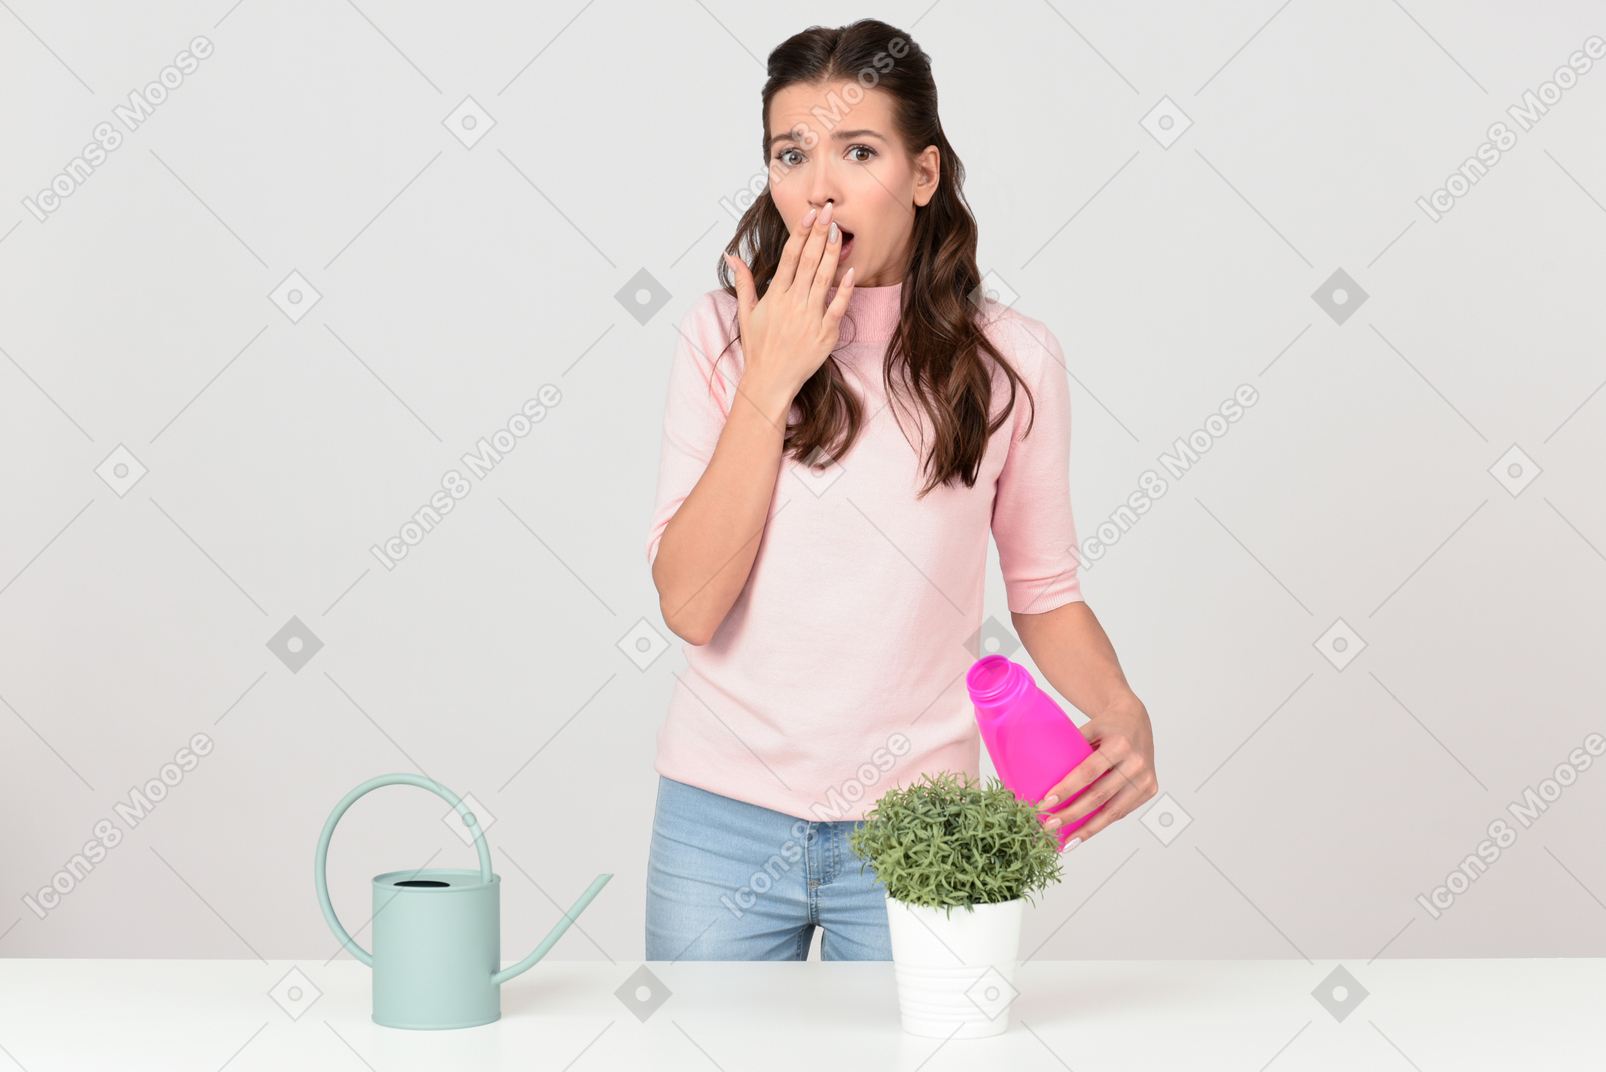 Attractive young woman gasping over mistreated houseplant